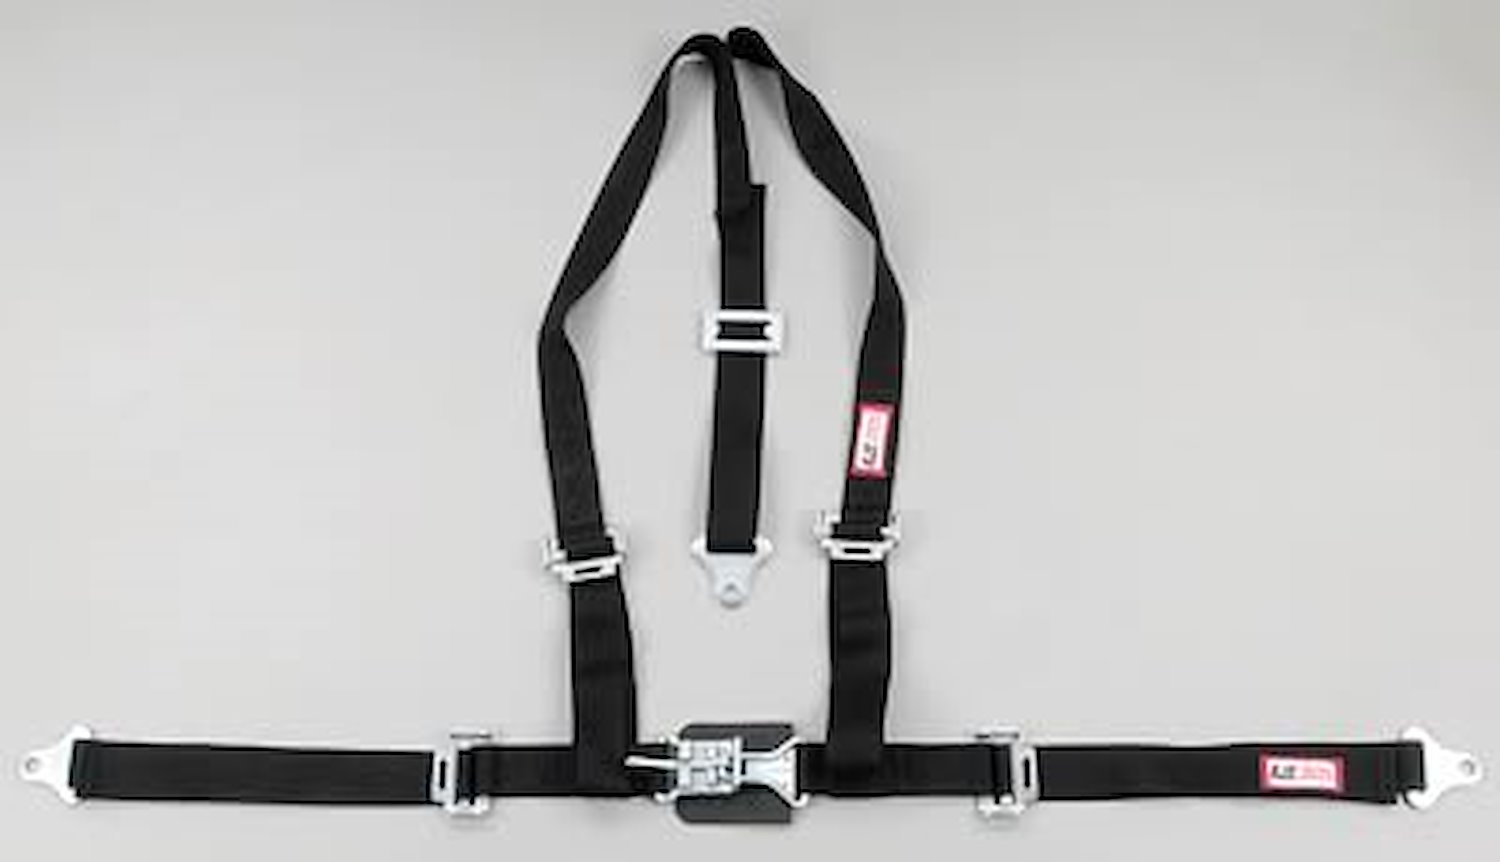 NON-SFI L&L HARNESS 2 PULL UP Lap Belt SNAP SEWN IN 2 S.H. INDIVIDUAL FLOOR Mount WRAP/BOLT RED